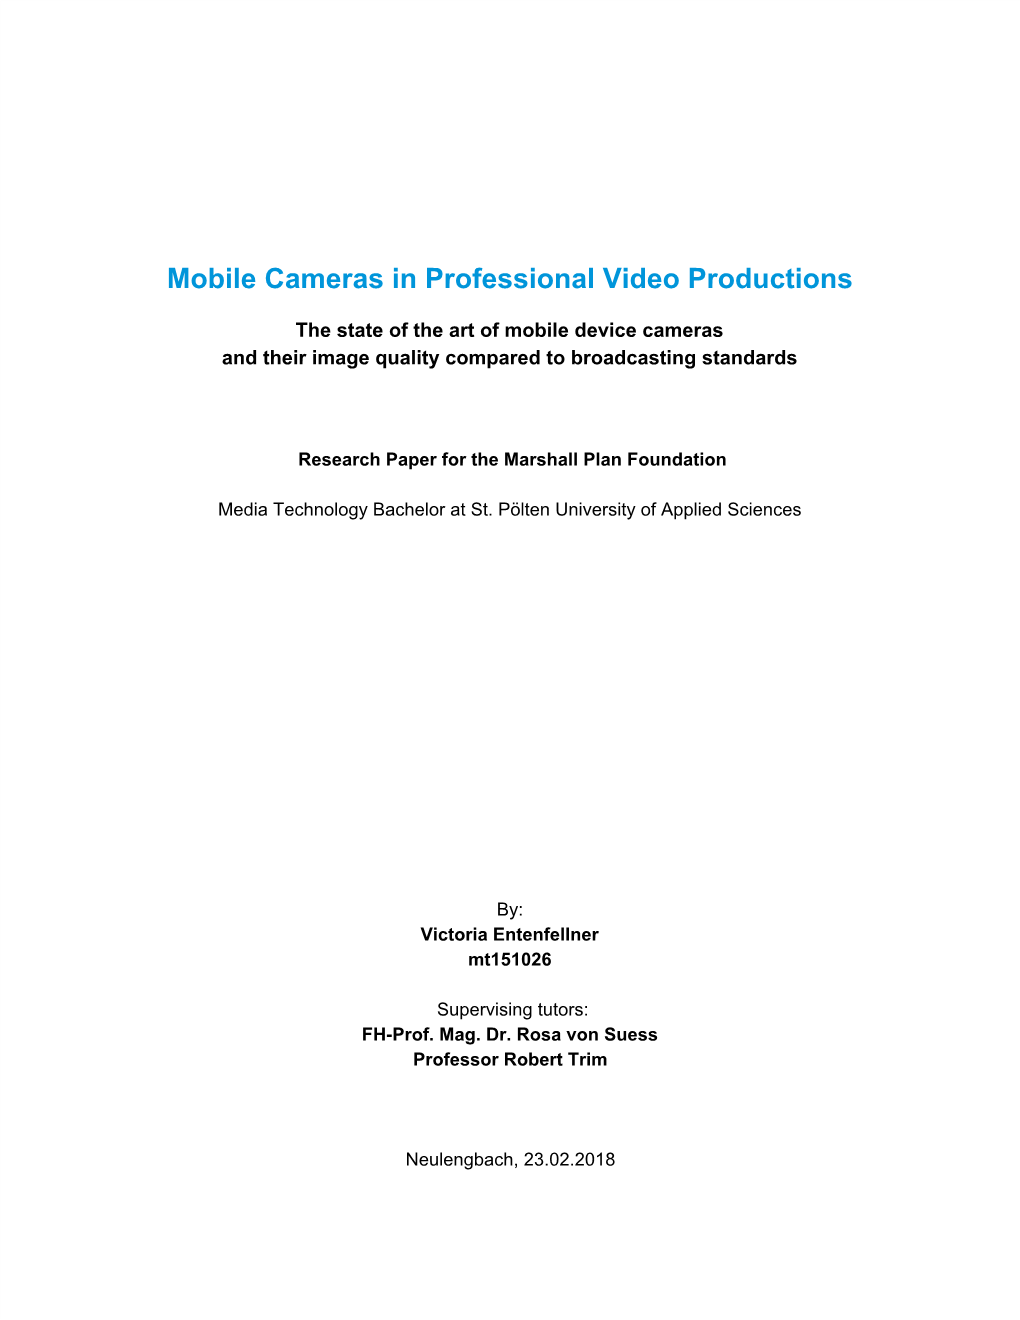 Mobile Cameras in Professional Video Productions